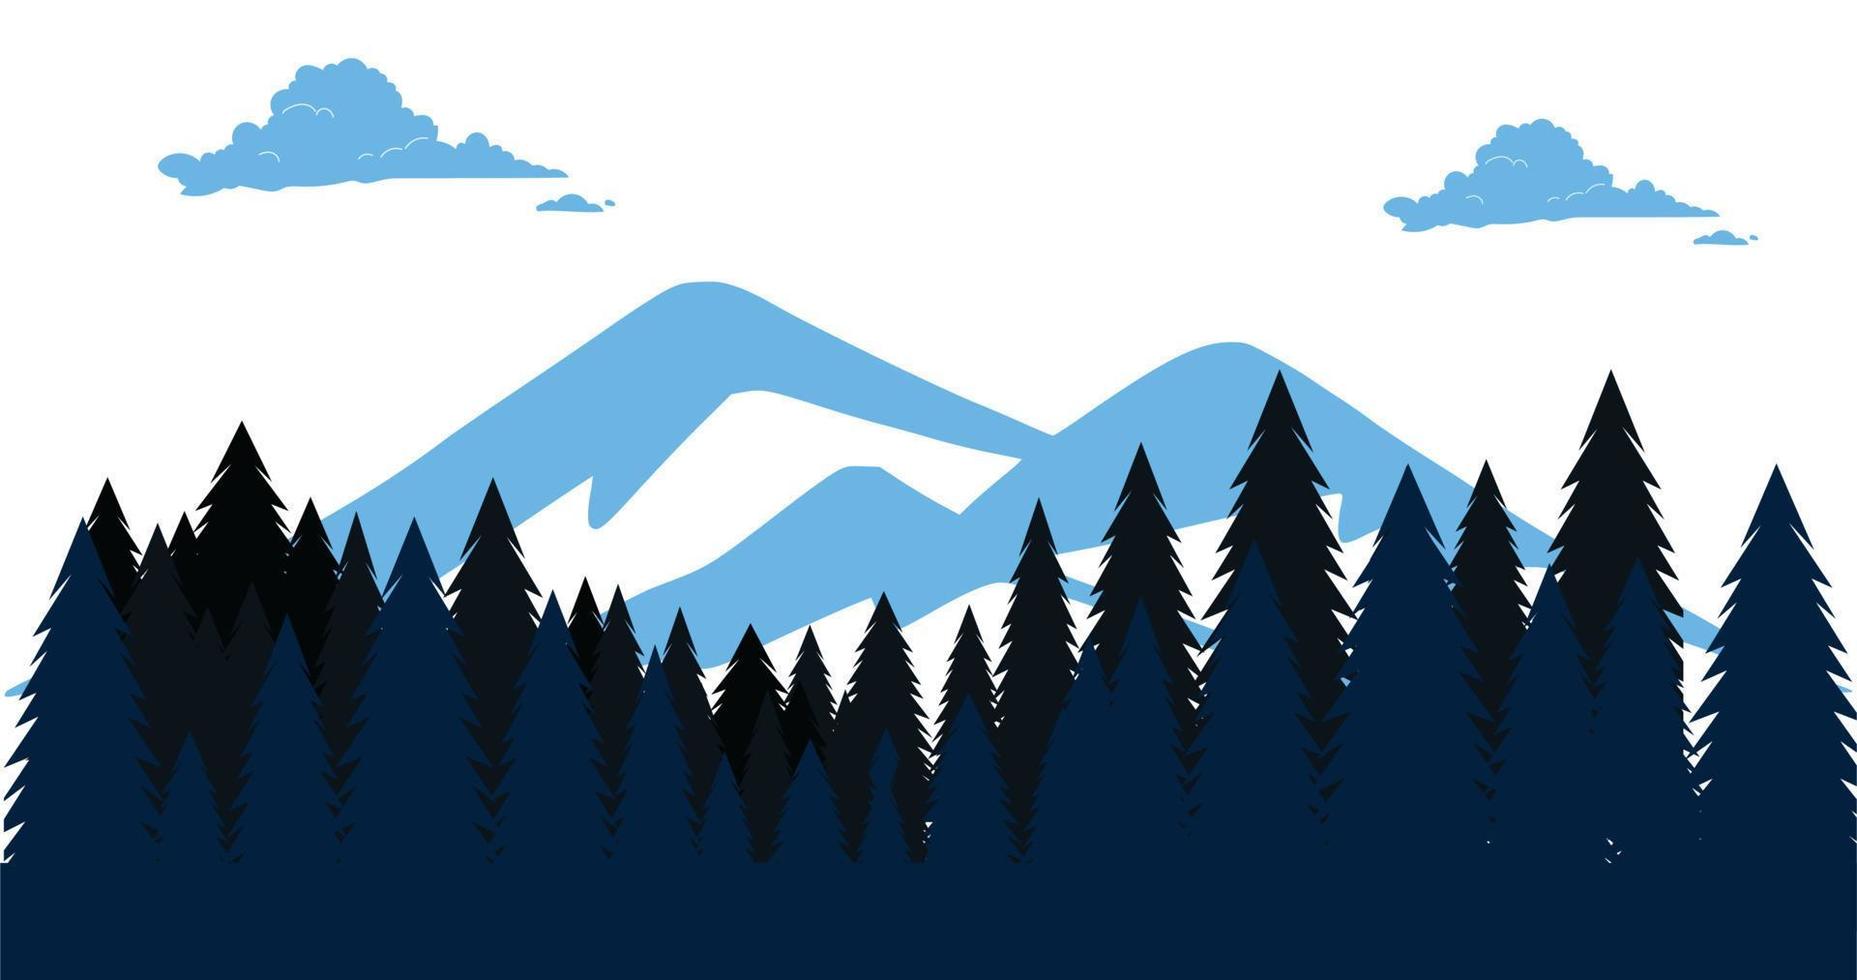 Mountain and trees vector